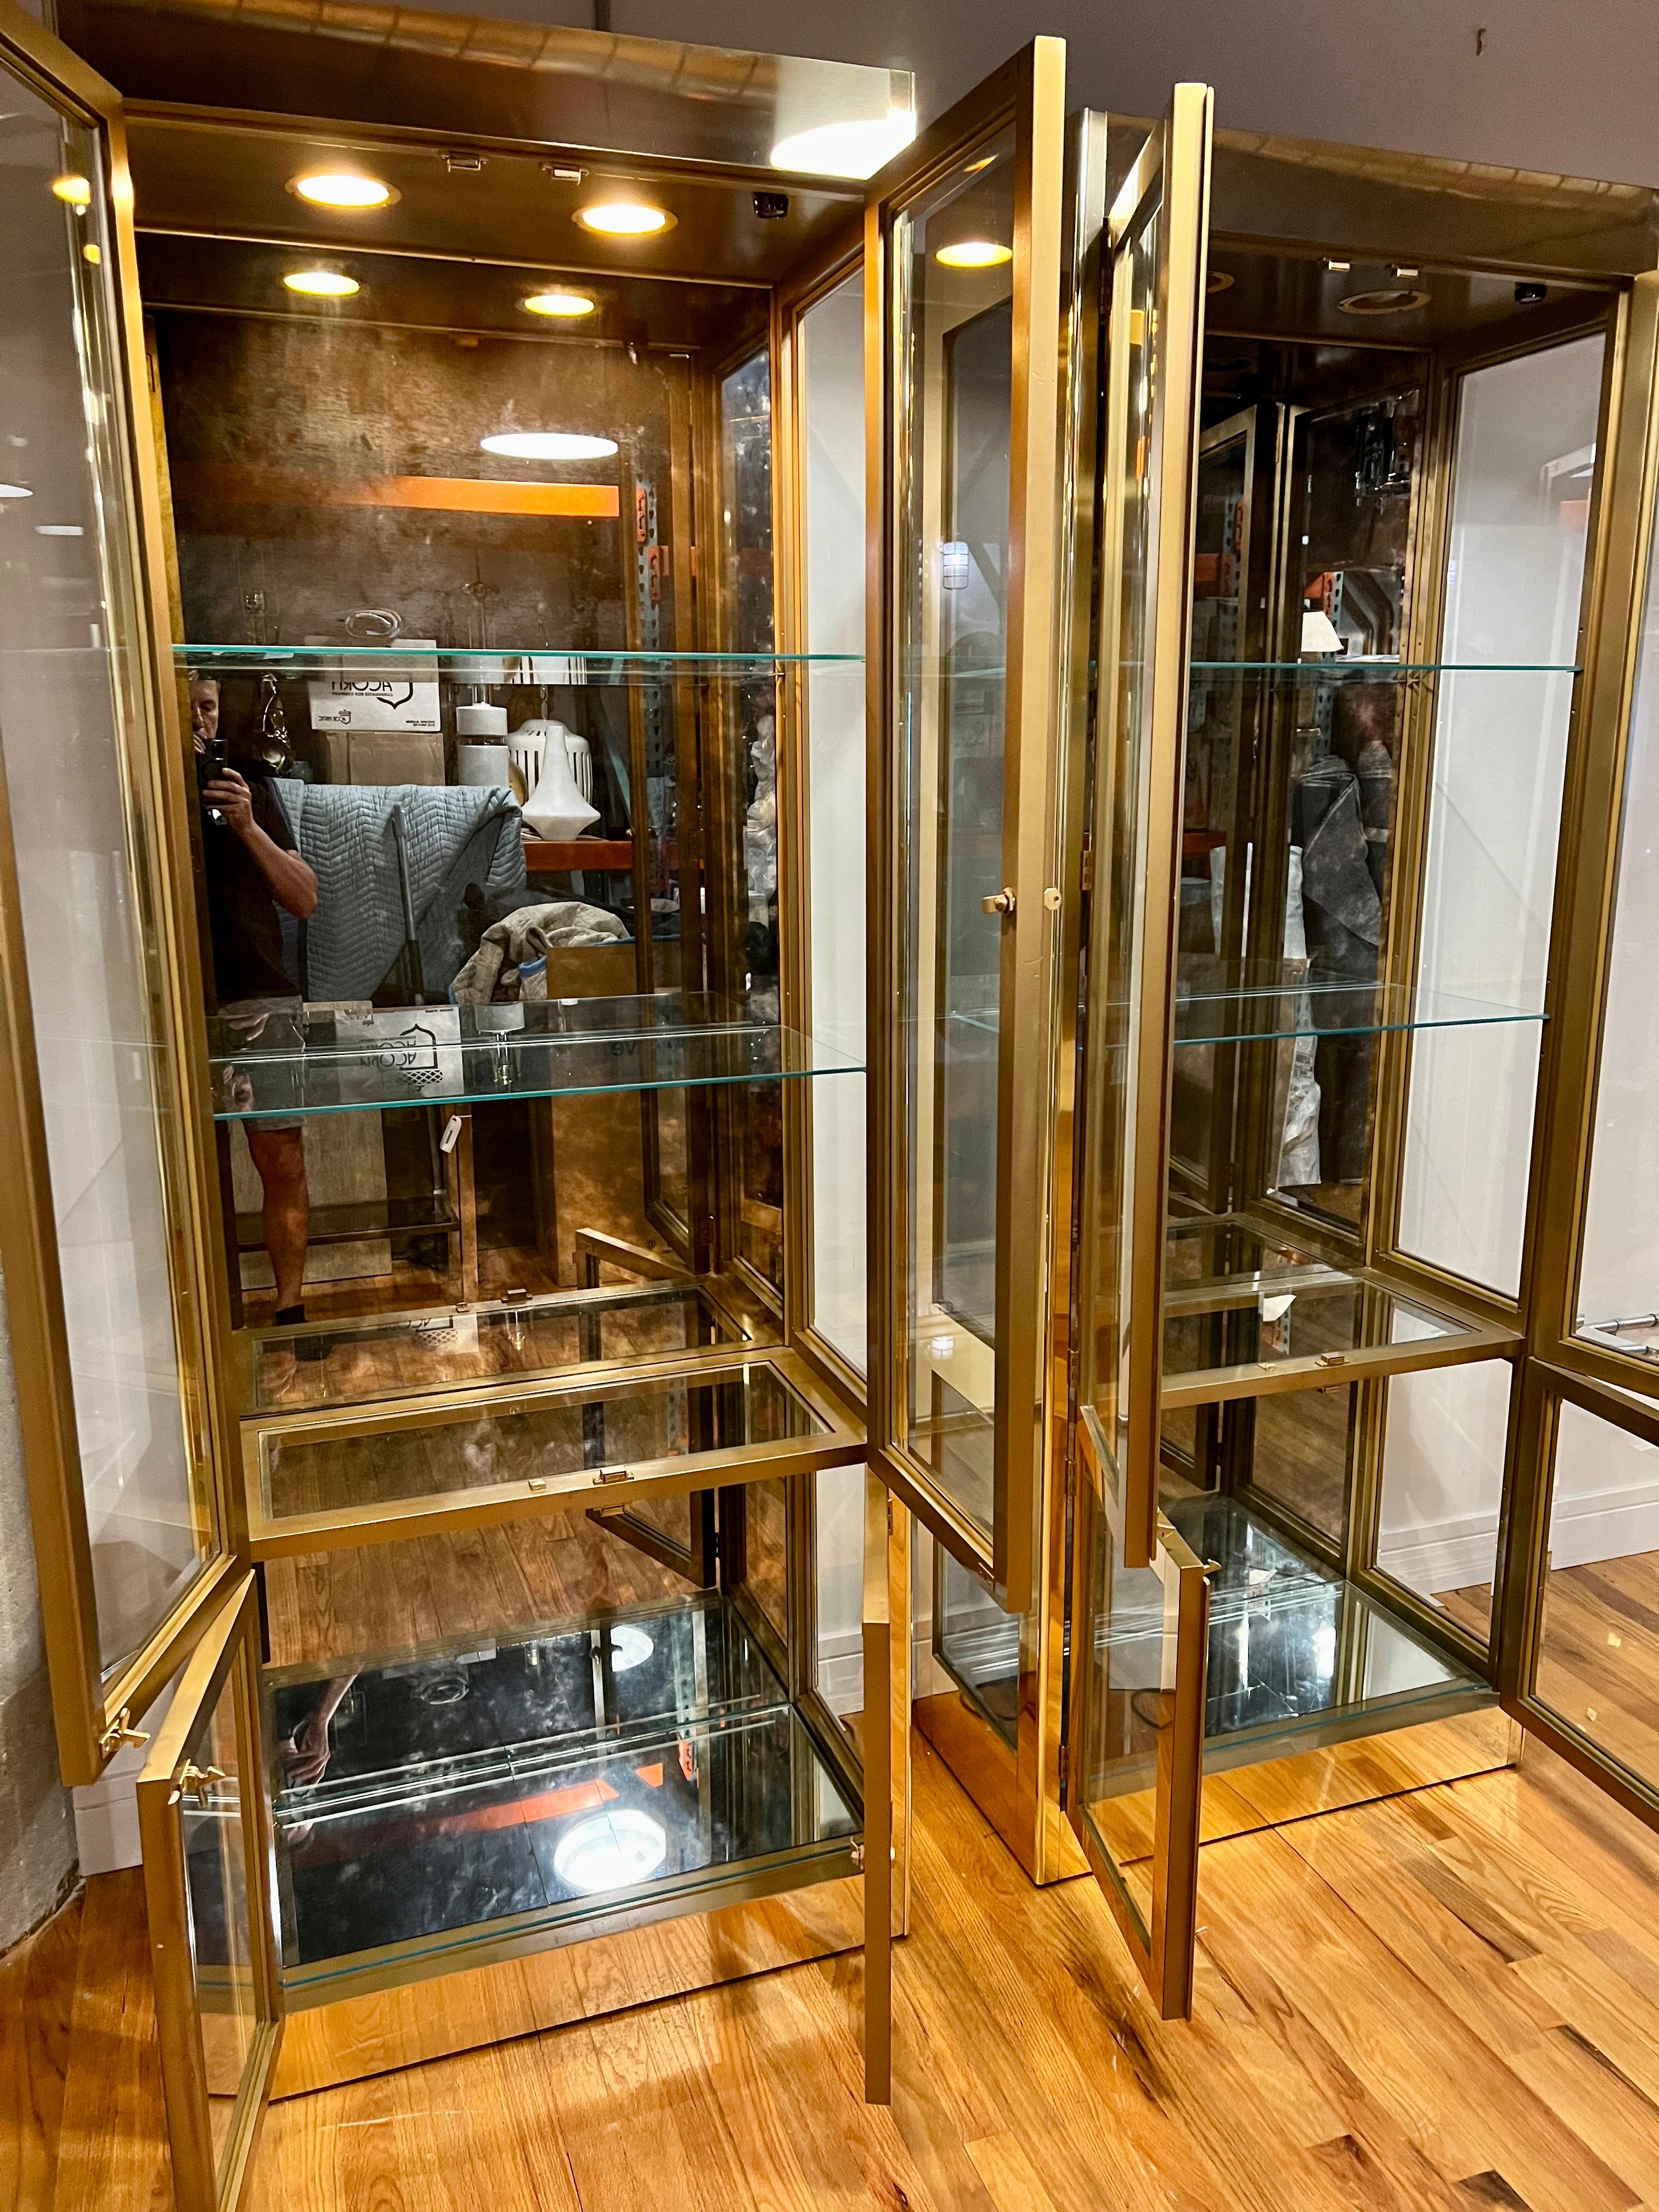 Pair of brass and glass display cabinets or vitrines by Mastercraft. These chic and elegant cabinets are in remarkably good condition for their age featuring a smoke mirrored back panel and four glass shelves. The cabinets can be illuminated and